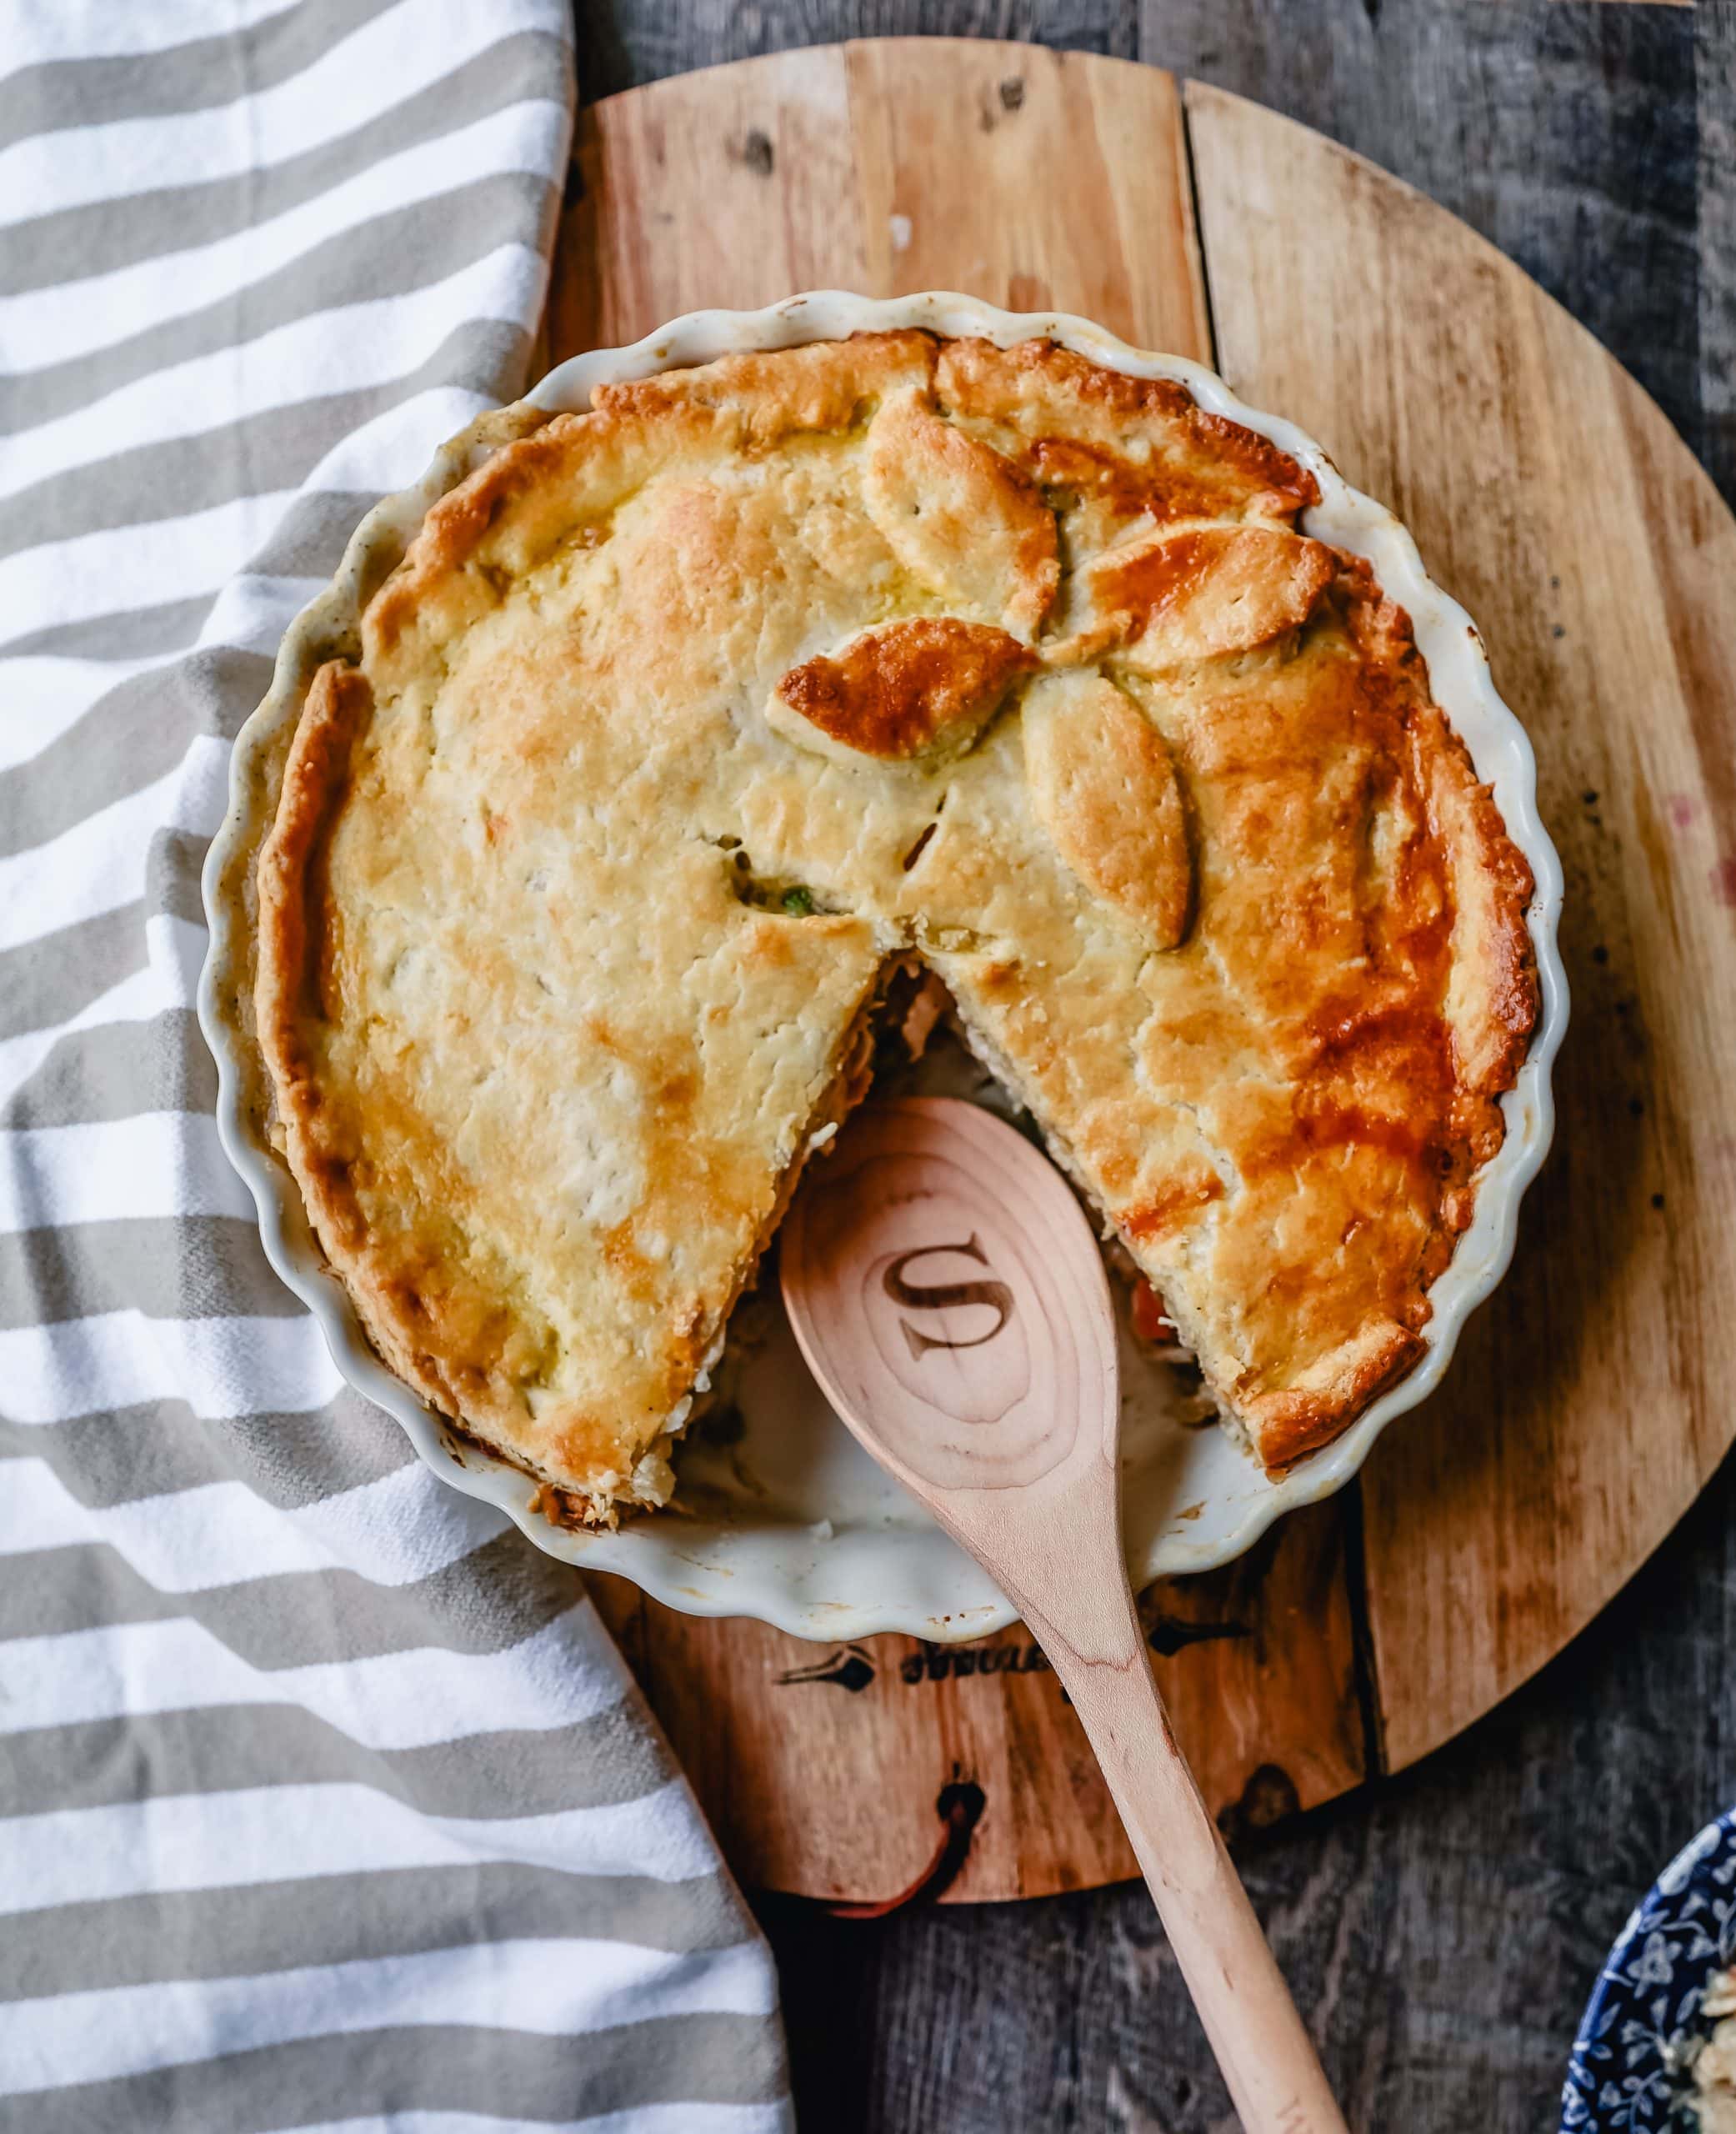 Chicken Pot Pie. Homemade Chicken Pot Pie made with a buttery, flaky homemade pie crust filled with a rich, creamy sauce filled with vegetables and tender chicken. The best comfort food dinner!